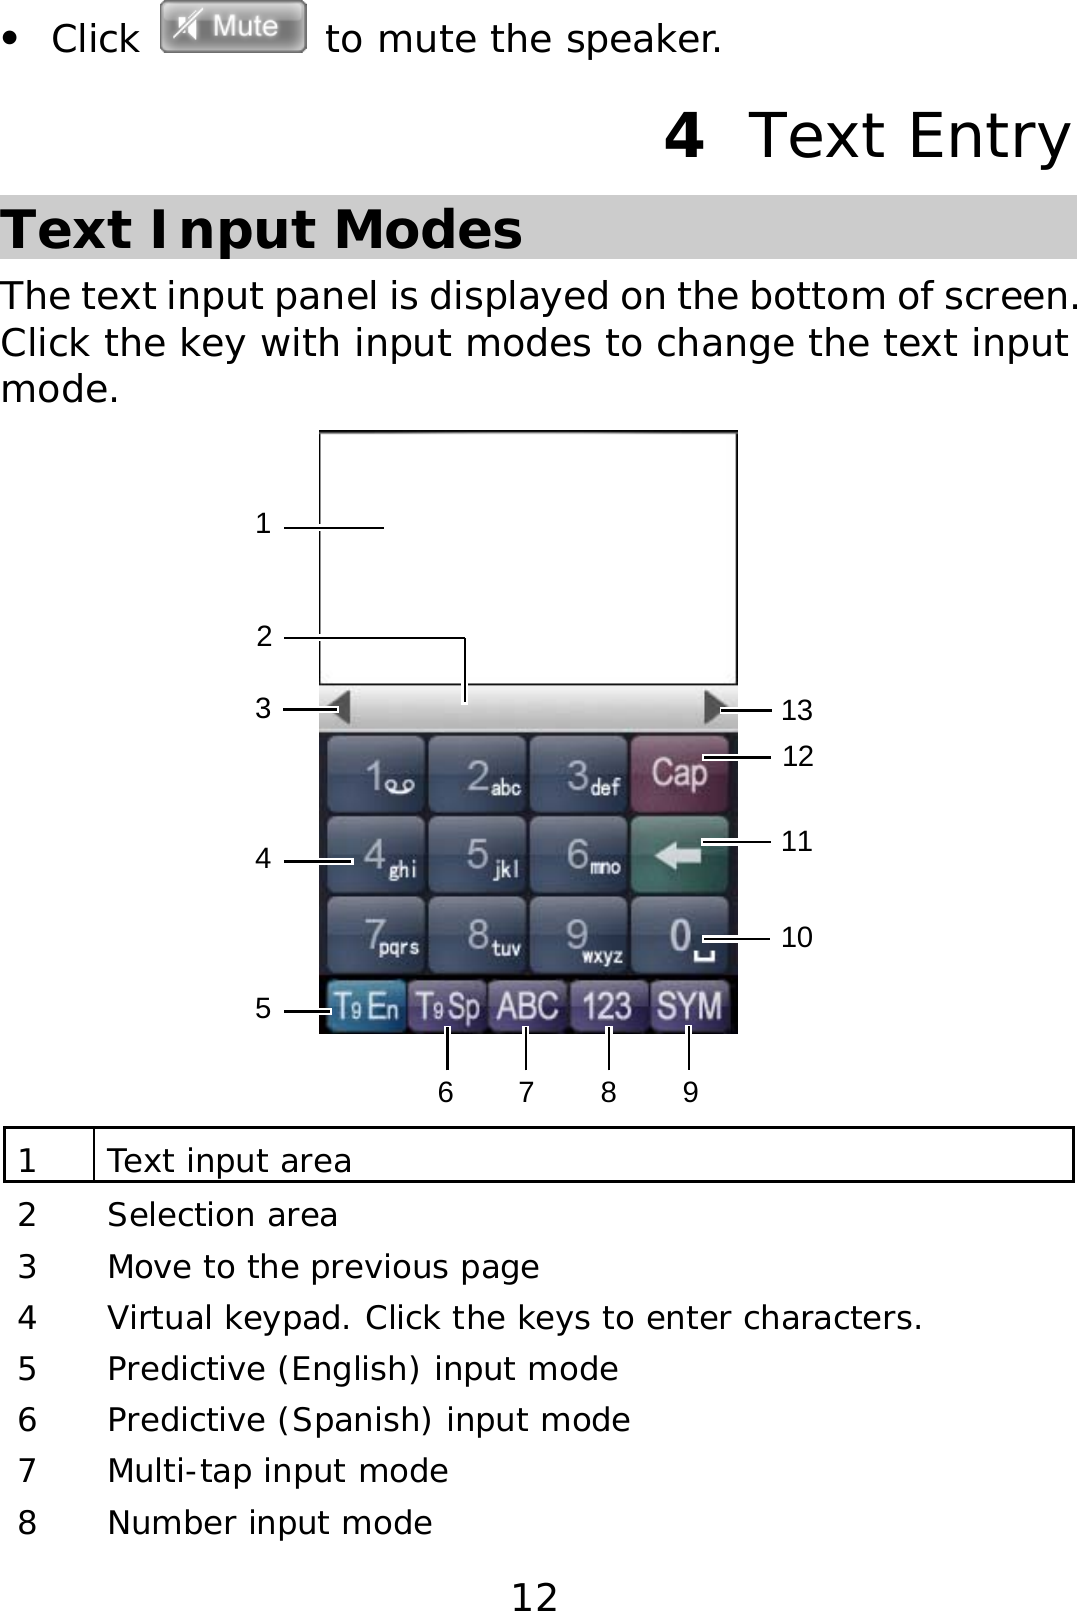 12 z Click  to mute the speaker. 4  Text Entry Text Input Modes The text input panel is displayed on the bottom of screen. Click the key with input modes to change the text input mode. 34567 981101112132 1 Text input area 2 Selection area 3  Move to the previous page 4  Virtual keypad. Click the keys to enter characters. 5  Predictive (English) input mode 6  Predictive (Spanish) input mode 7 Multi-tap input mode 8 Number input mode 